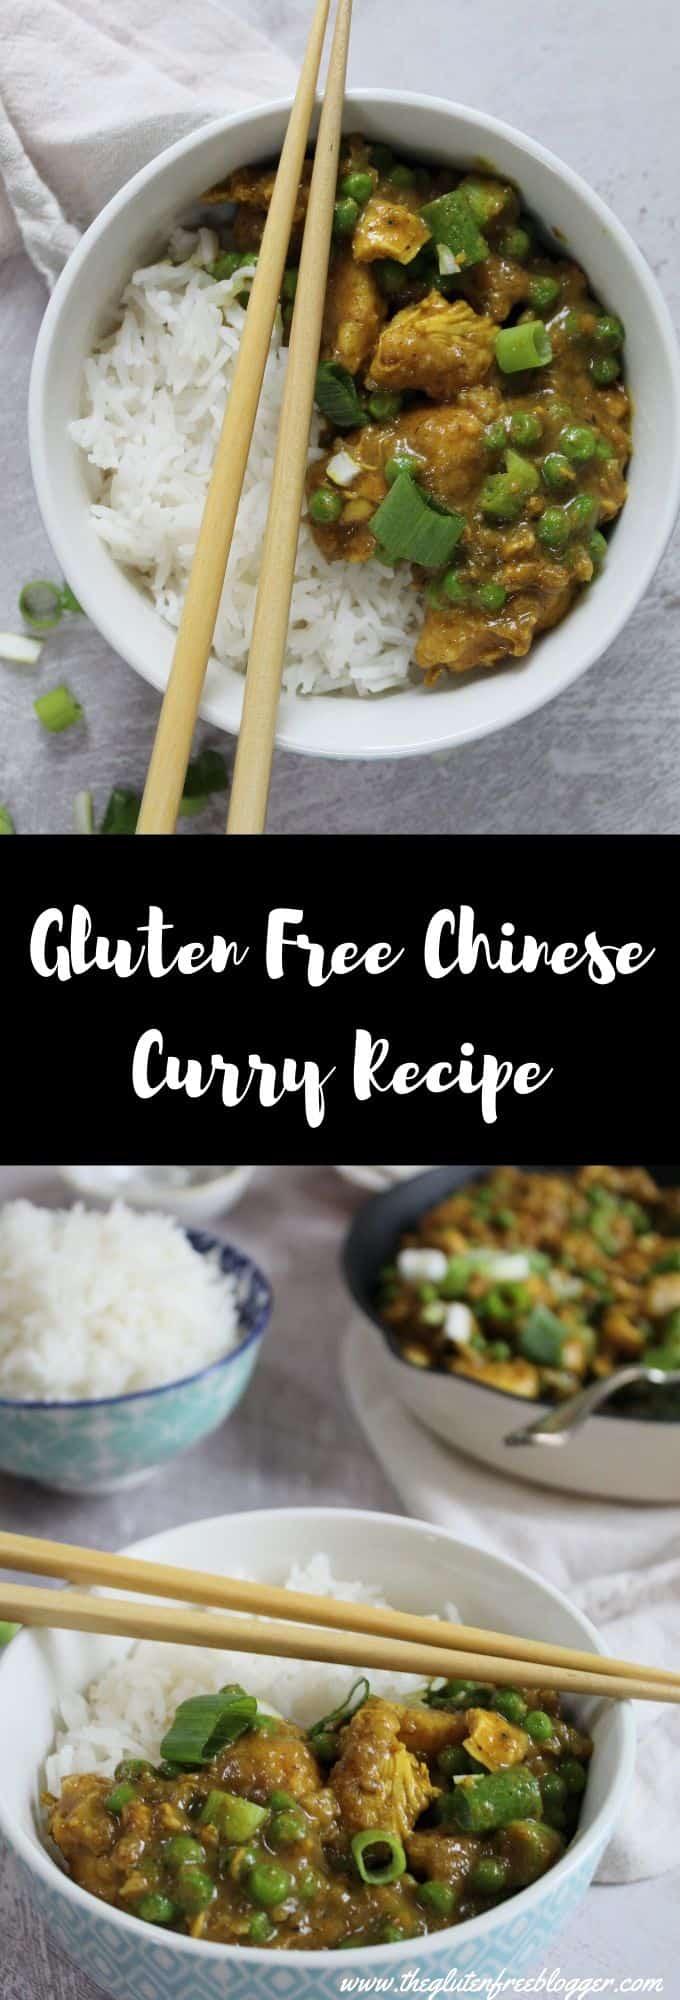 gluten free chinese curry recipe curry sauce chicken curry dairy free chinese new year coeliac celiac